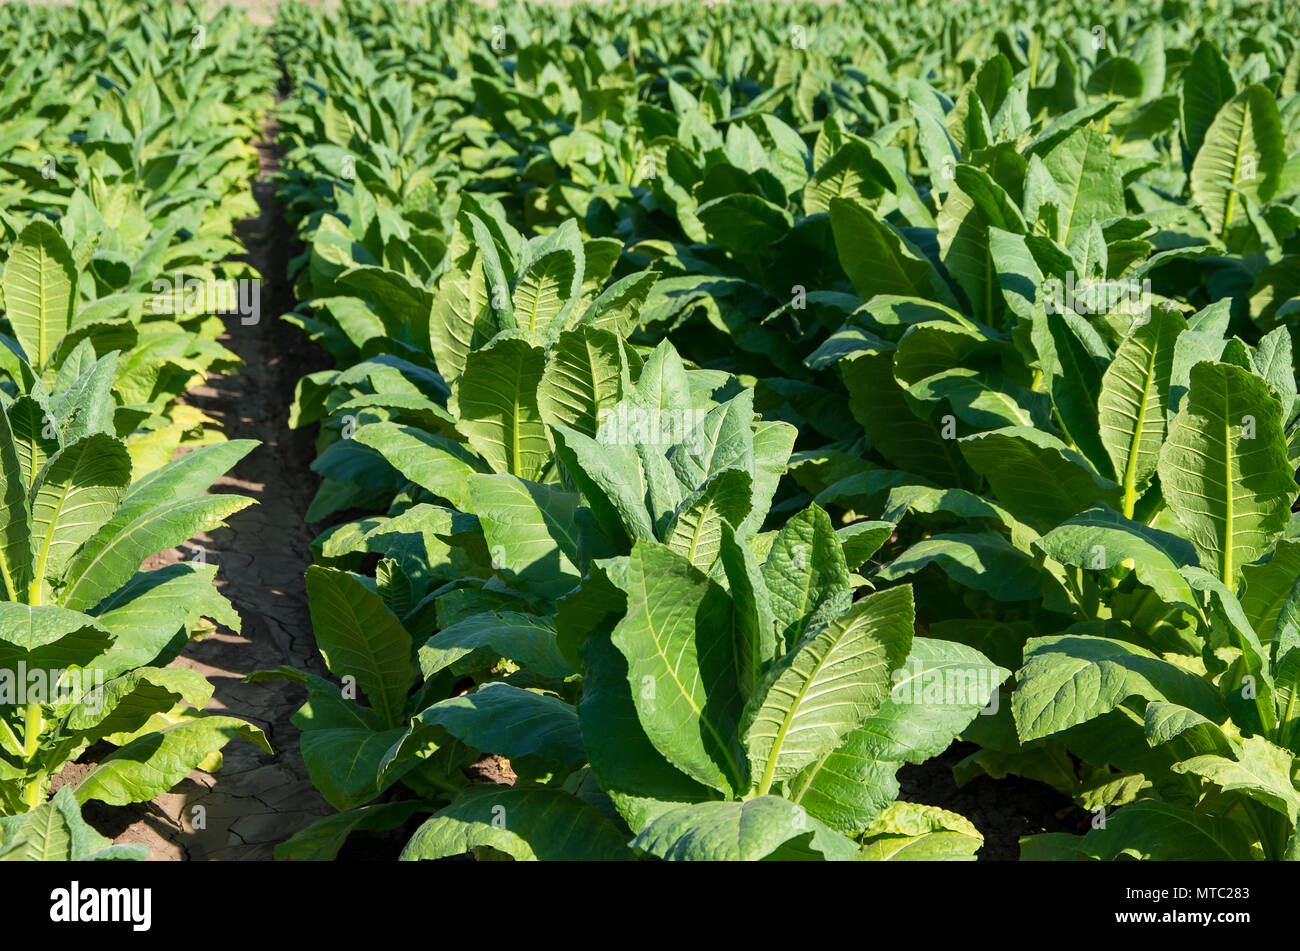 Tobacco plantation field. Nicotiana tabacum, cultivated tobacco Stock Photo